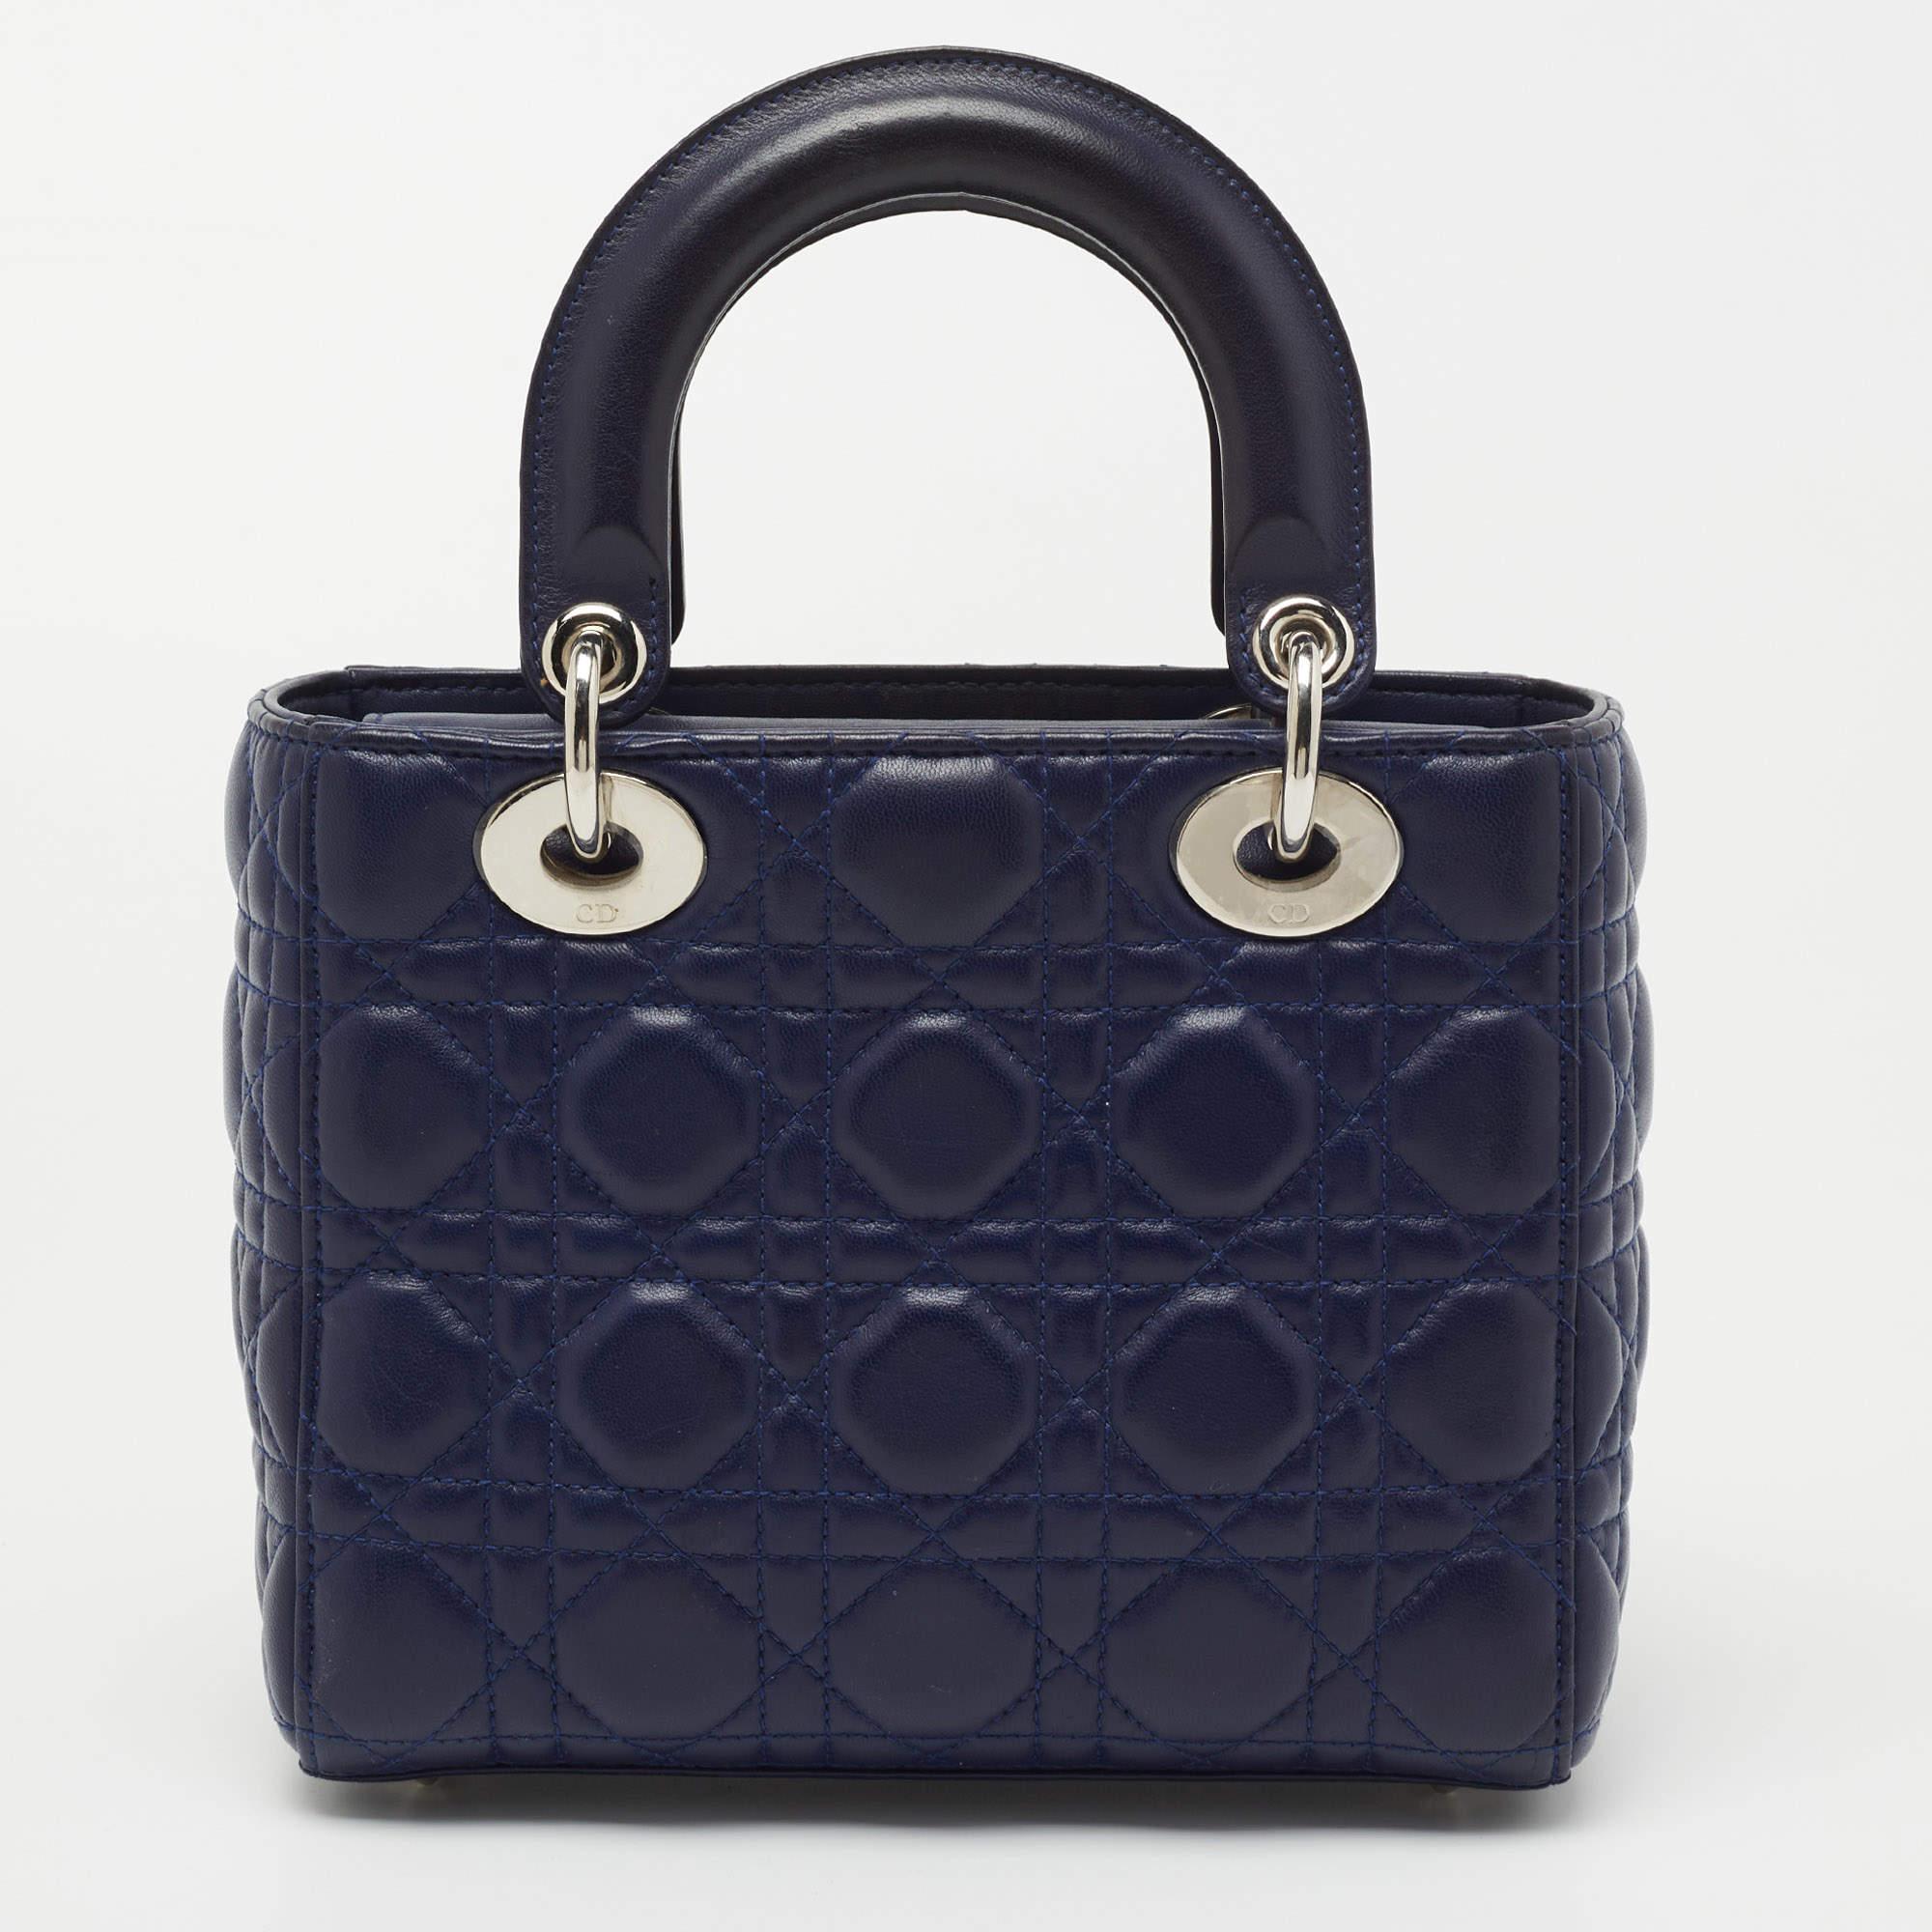 The Lady Dior tote is a Dior creation that has gained recognition worldwide and is today a coveted bag that every fashionista craves to possess. This blue tote has been crafted from leather, and it carries the signature Cannage quilt. It is equipped